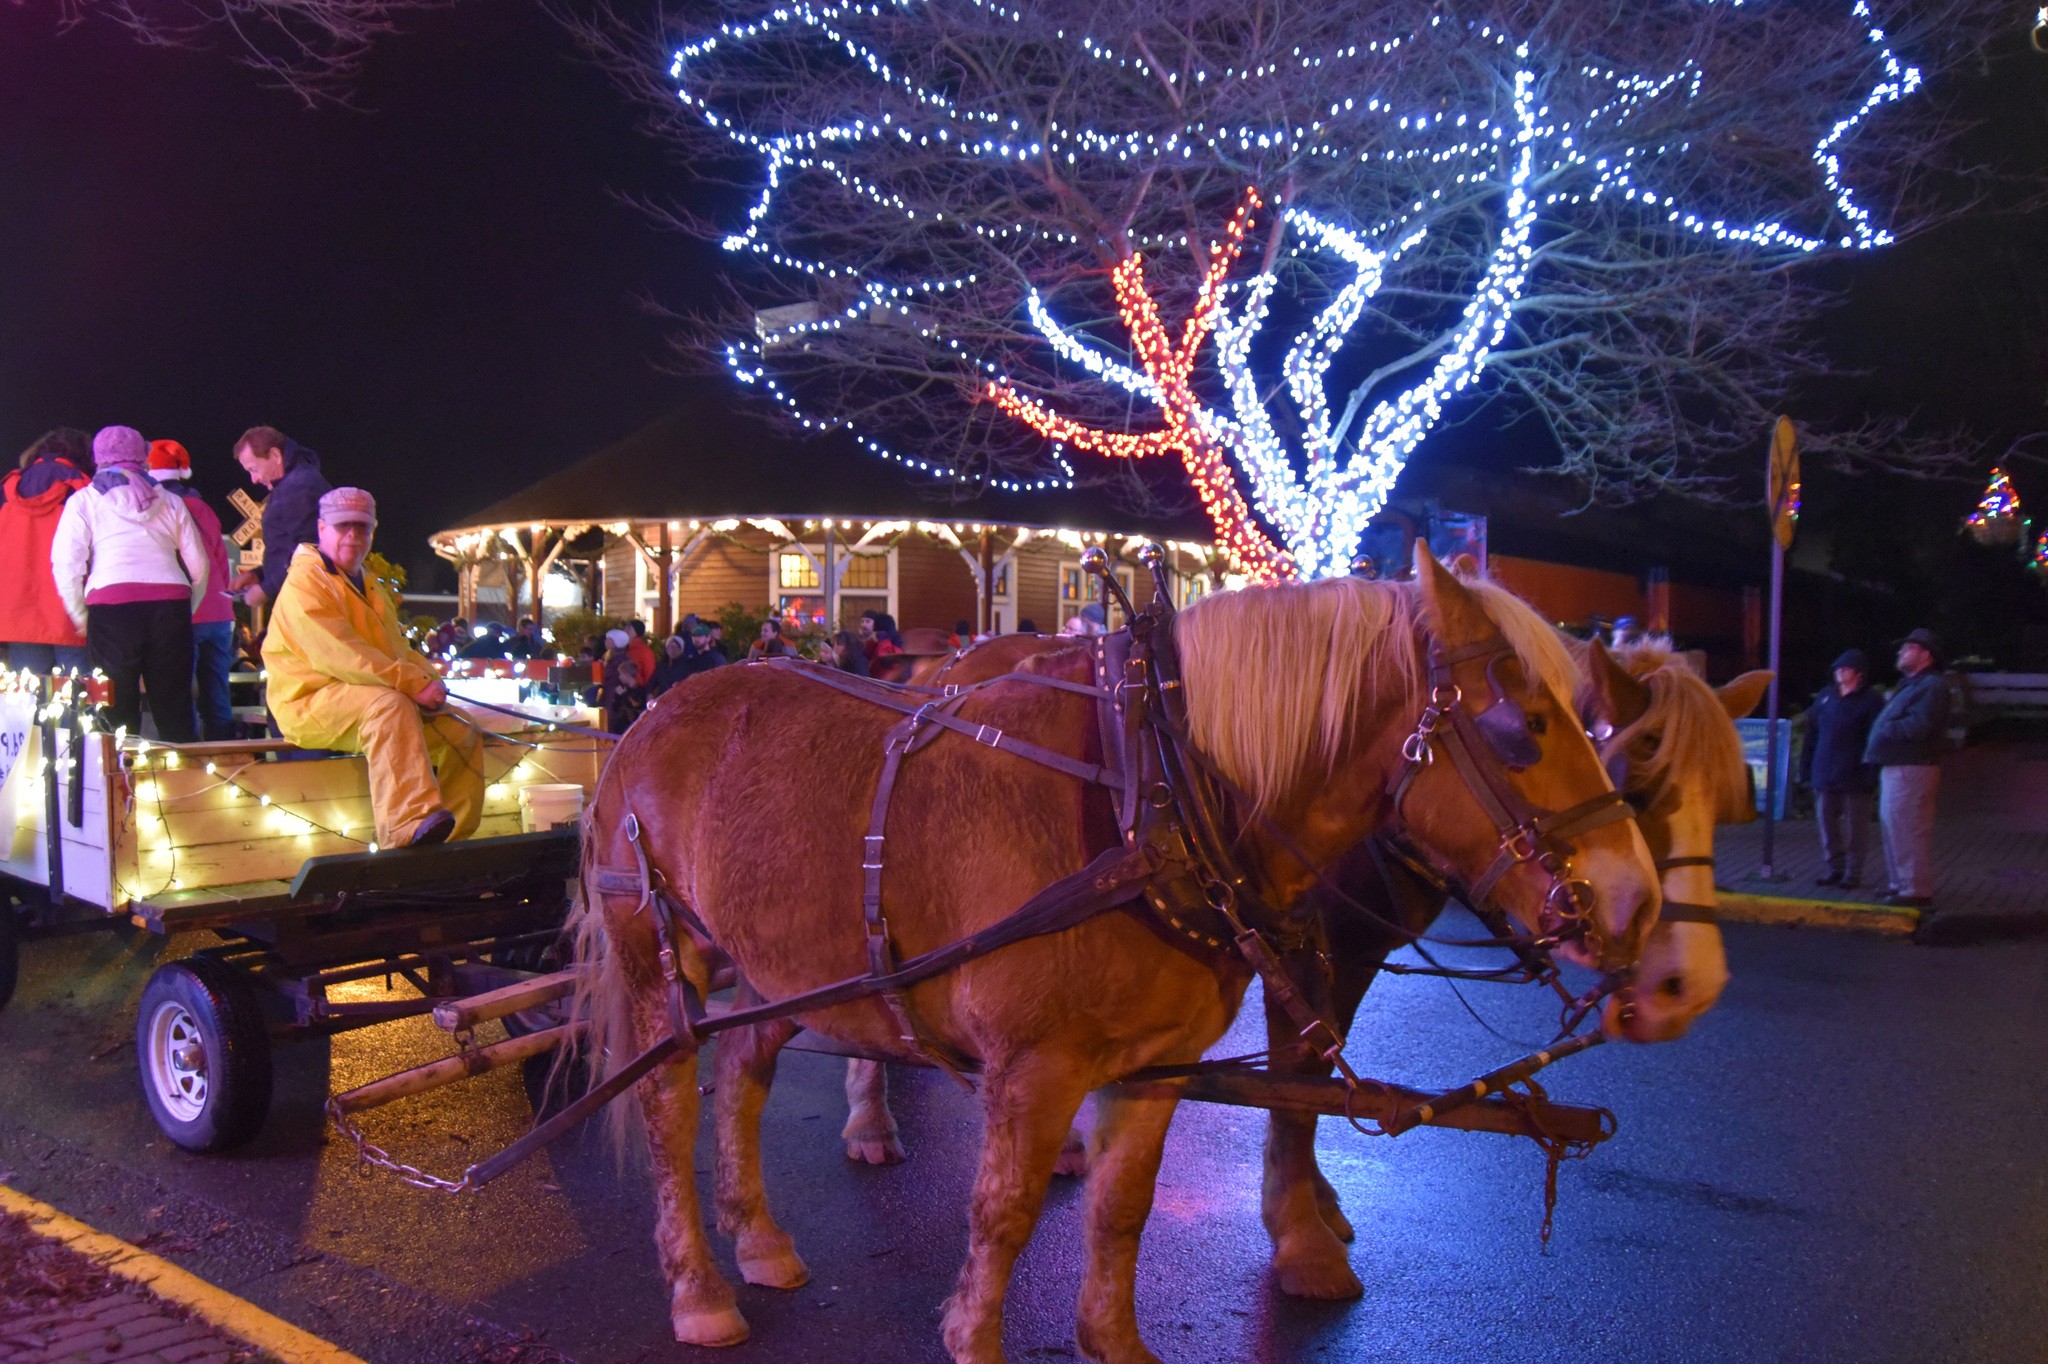 Horse-drawn wagon rides were a popular attraction at the Snoqualmie tree-lighting event Nov. 26.